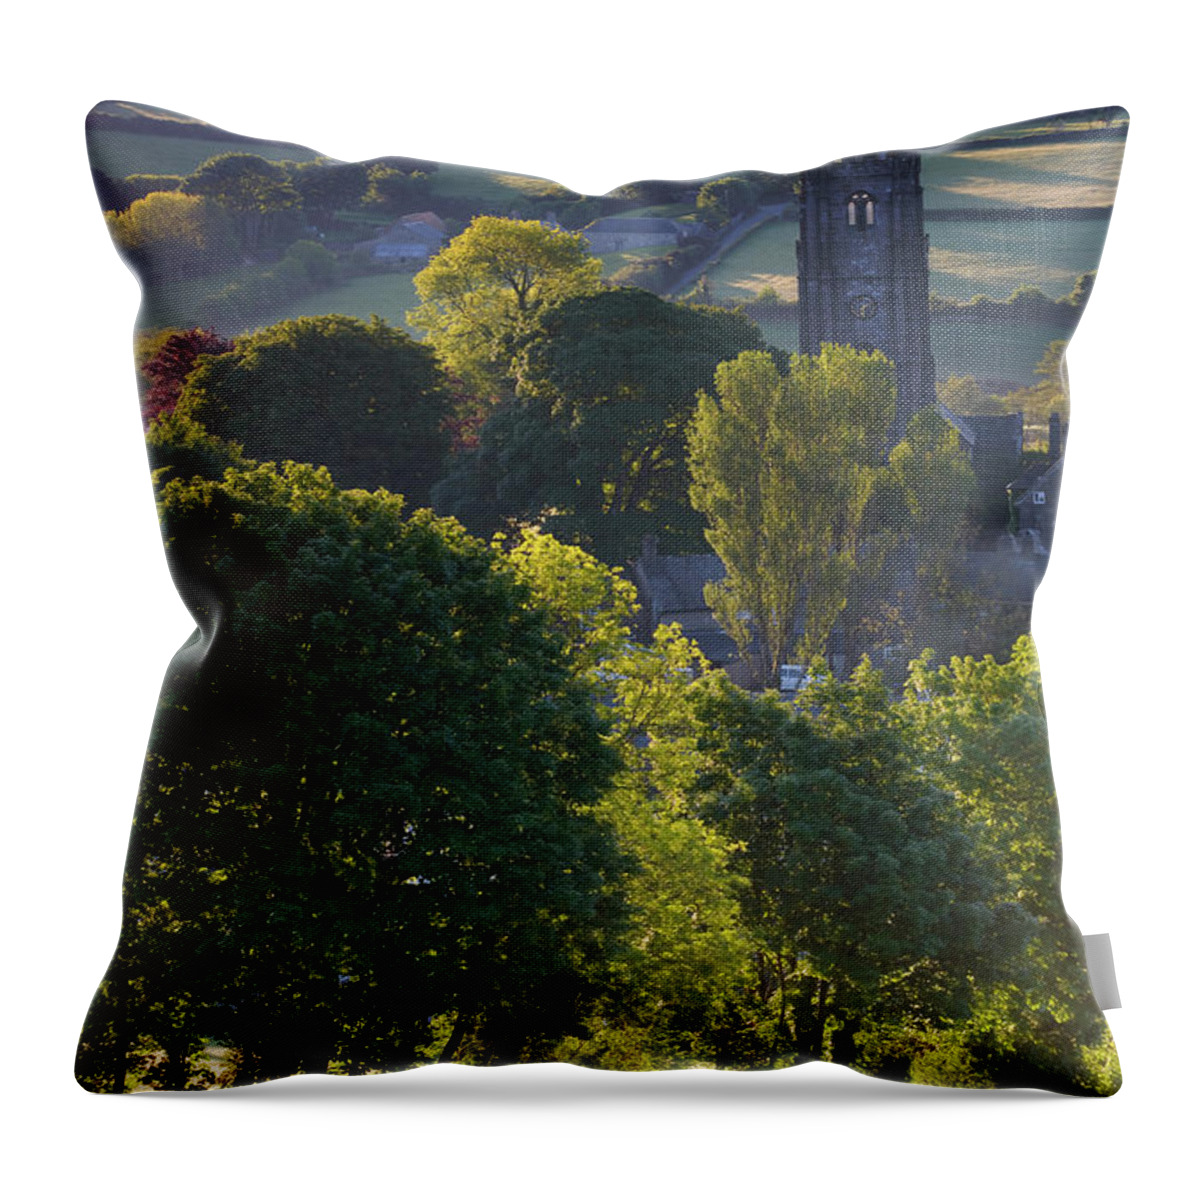 Tranquility Throw Pillow featuring the photograph Cows Grazing With St. Pancras Church In by Peter Adams